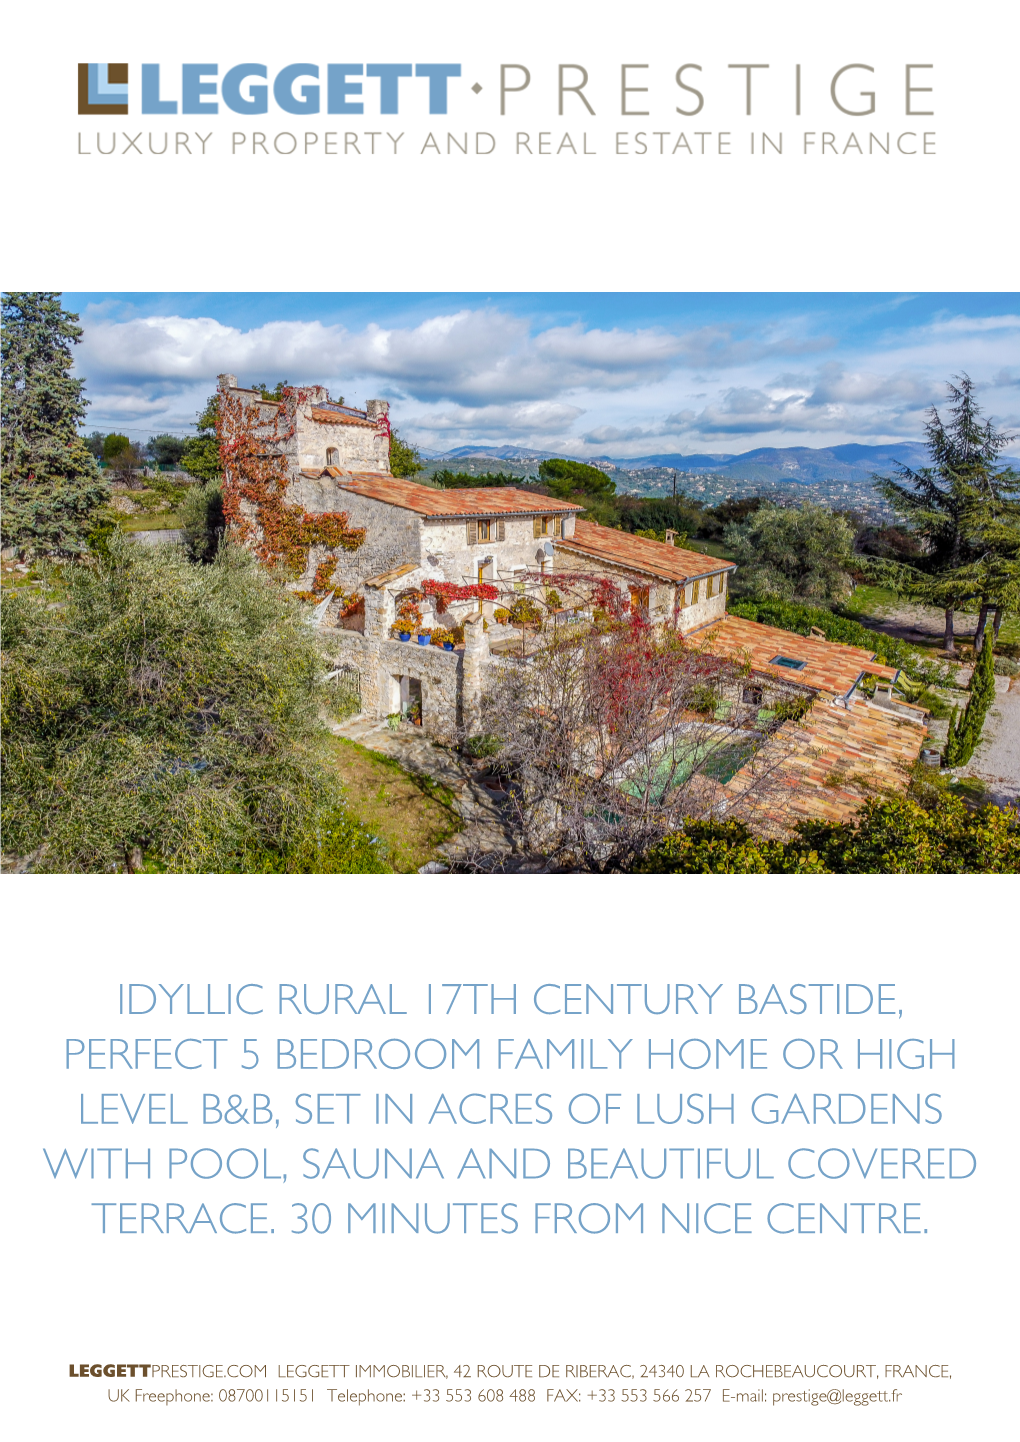 Idyllic Rural 17Th Century Bastide, Perfect 5 Bedroom Family Home Or High Level B&B, Set in Acres of Lush Gardens with Pool, Sauna and Beautiful Covered Terrace